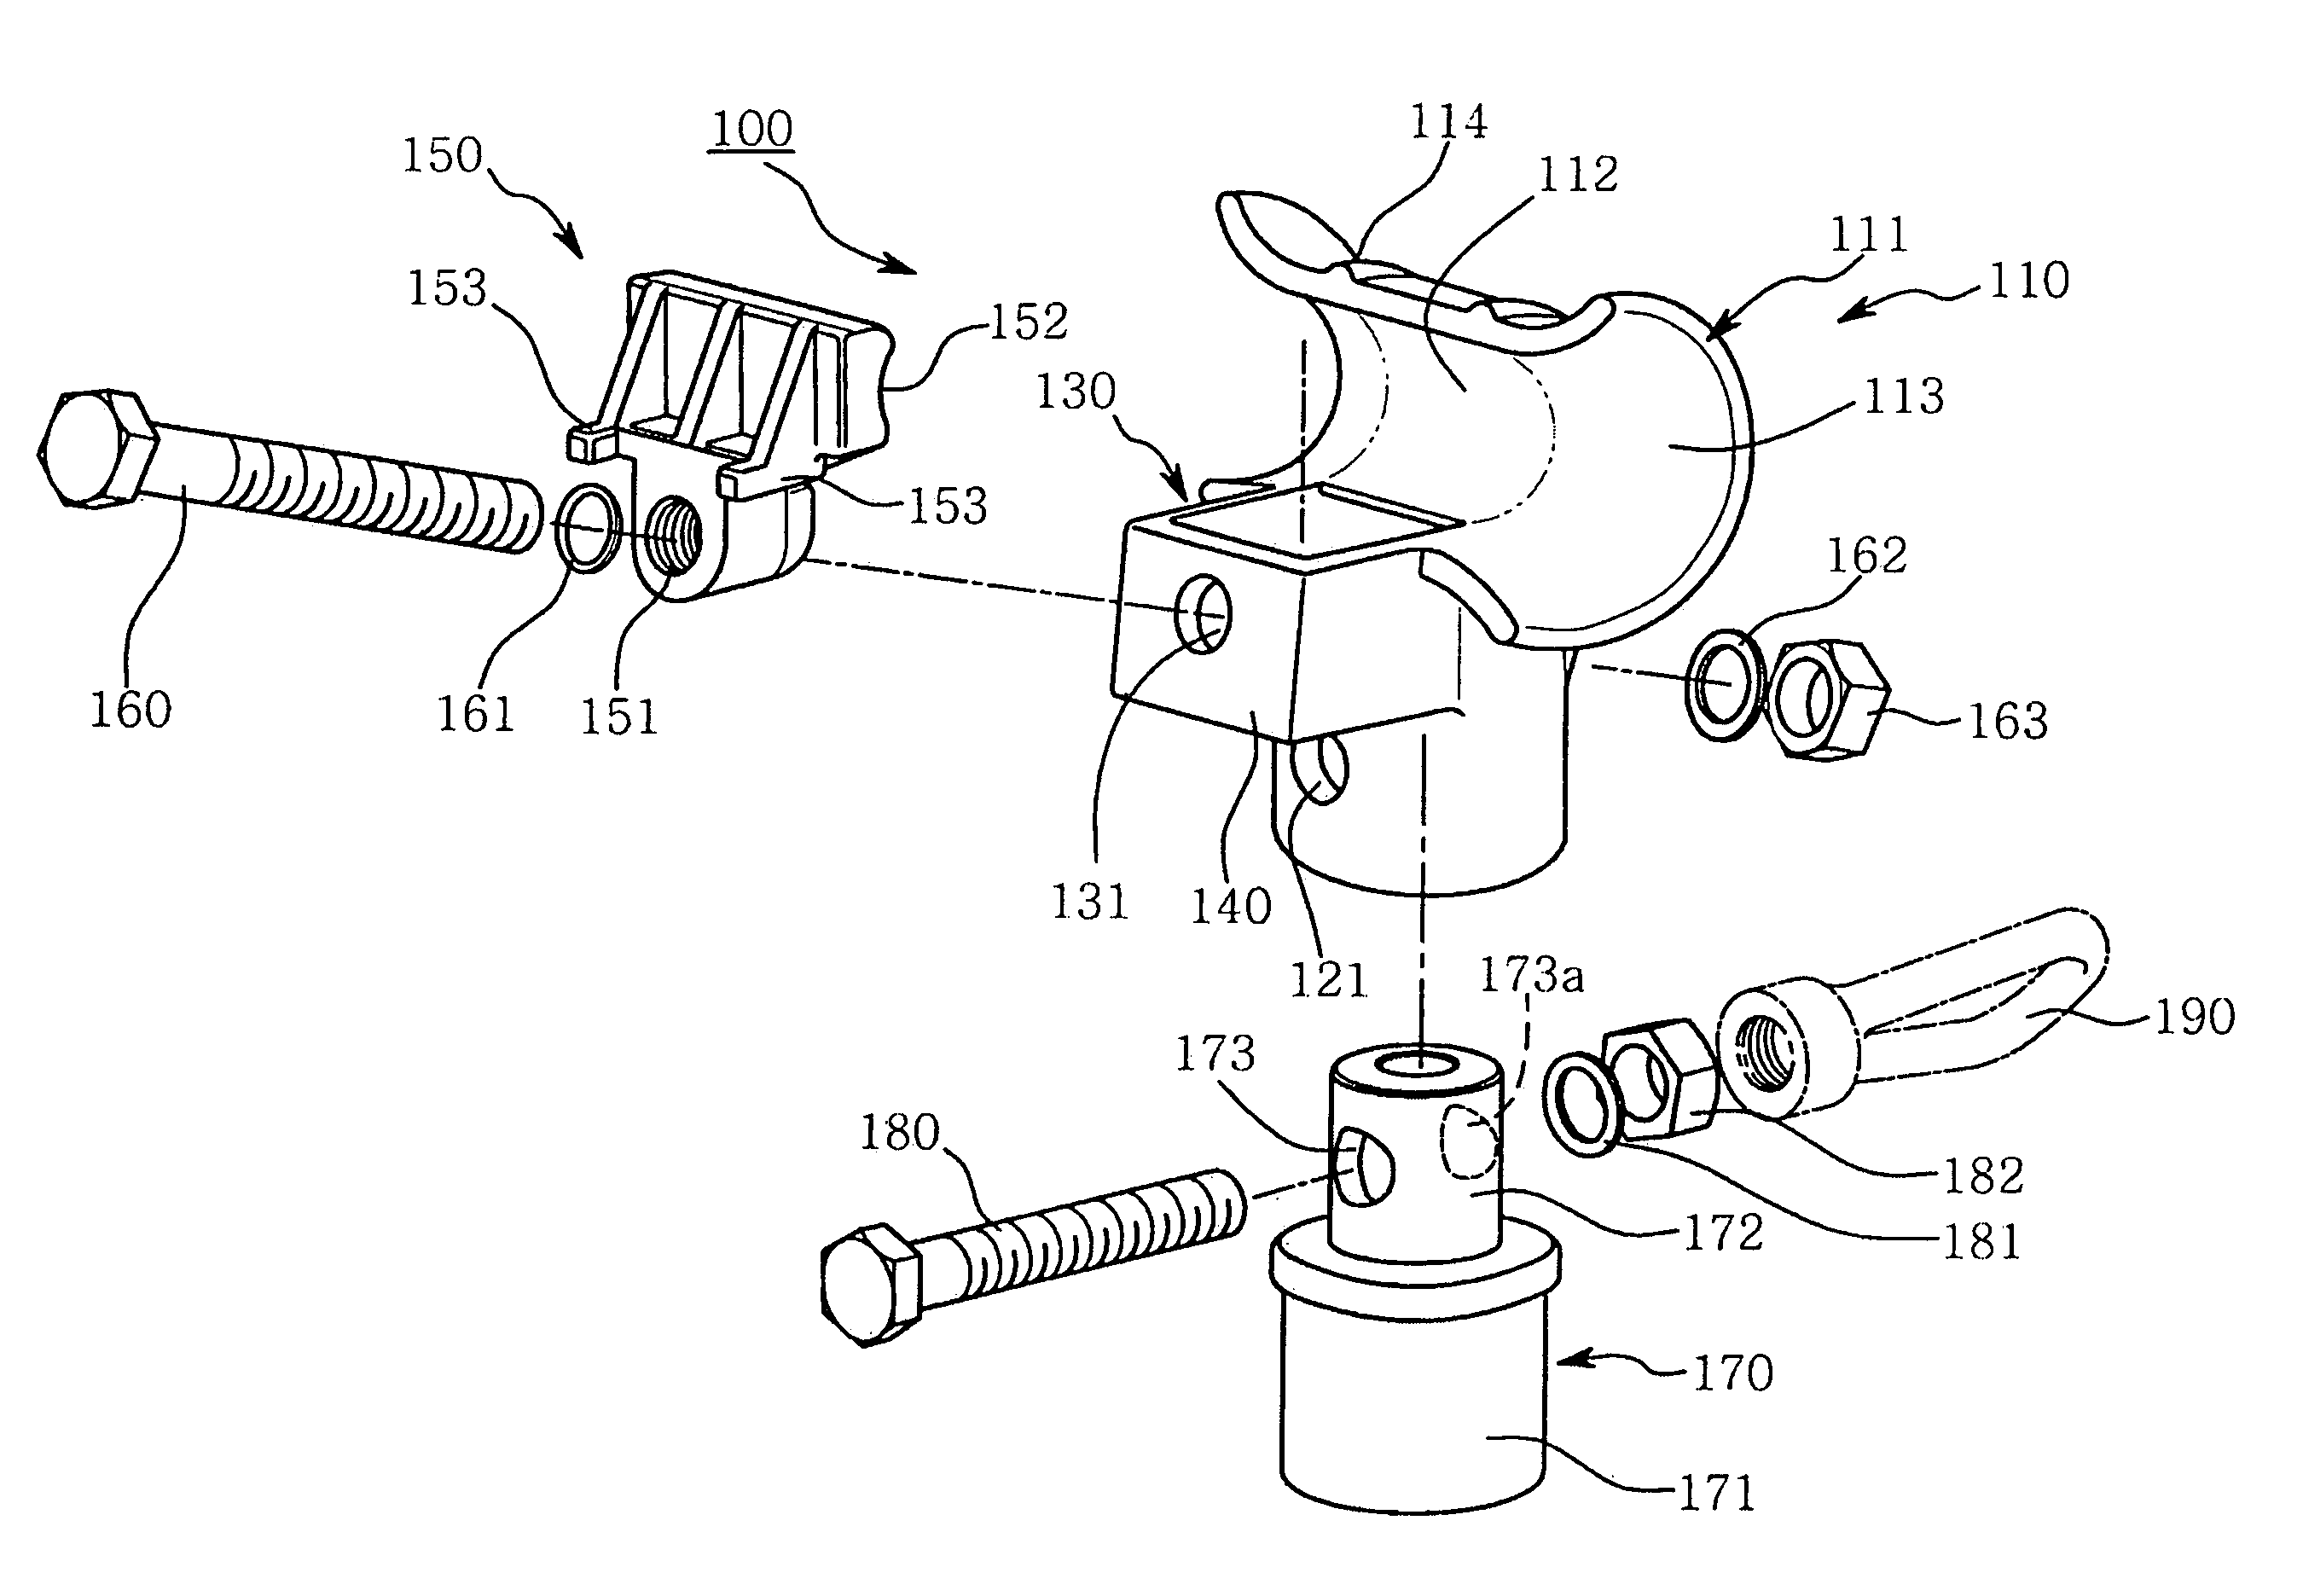 Electrical power line insulator with end clamp